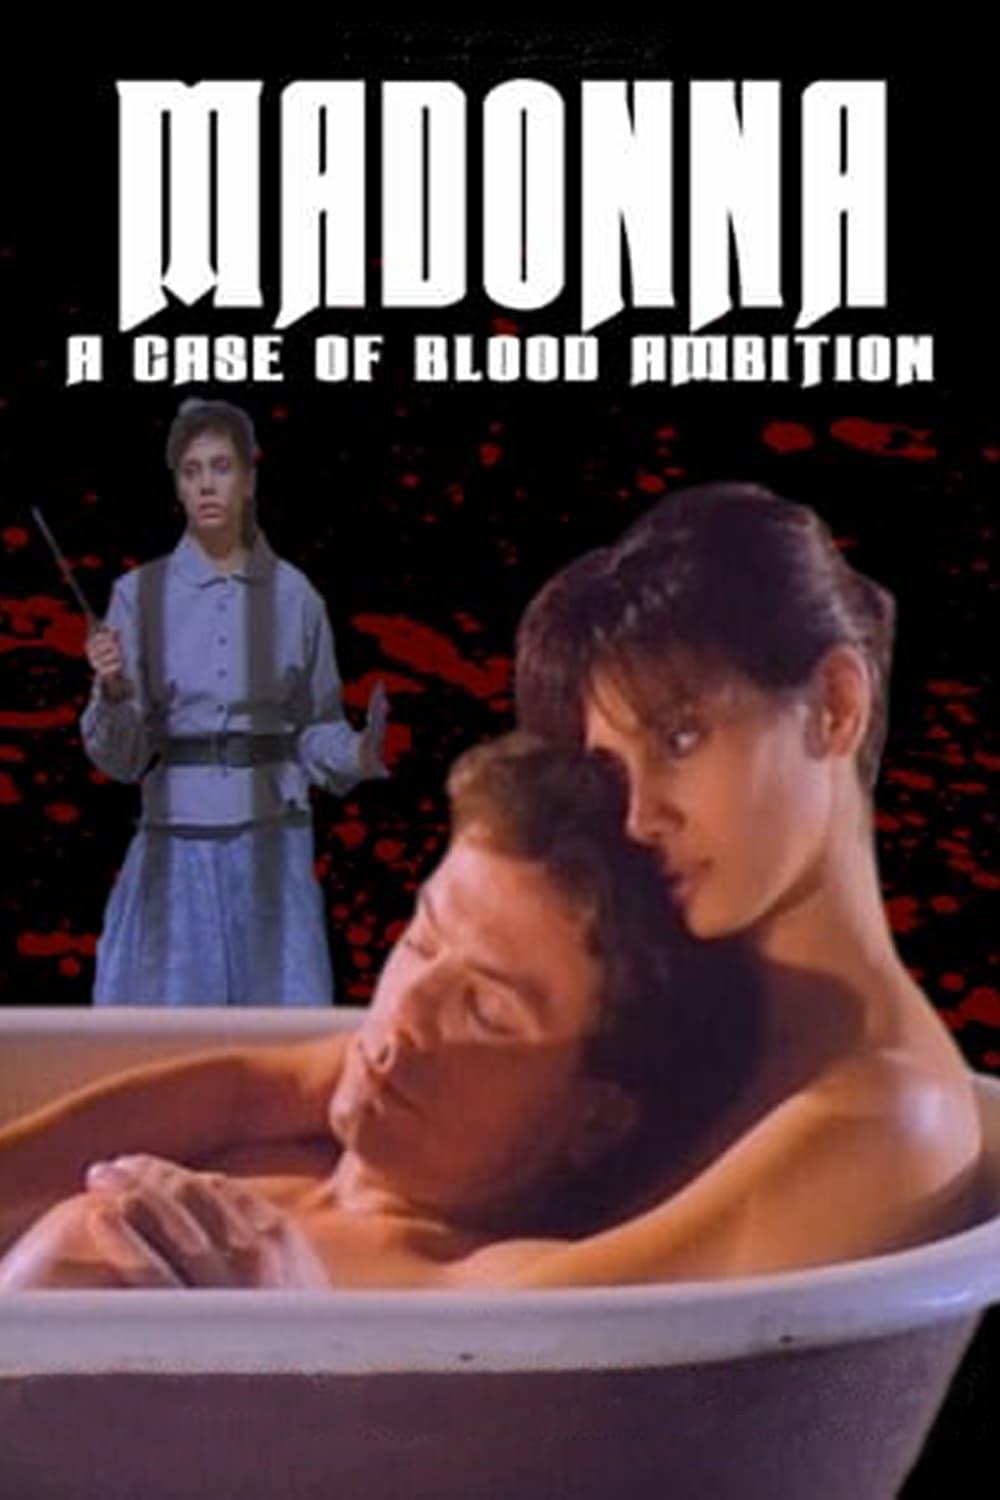 Madonna: A Case of Blood Ambition poster